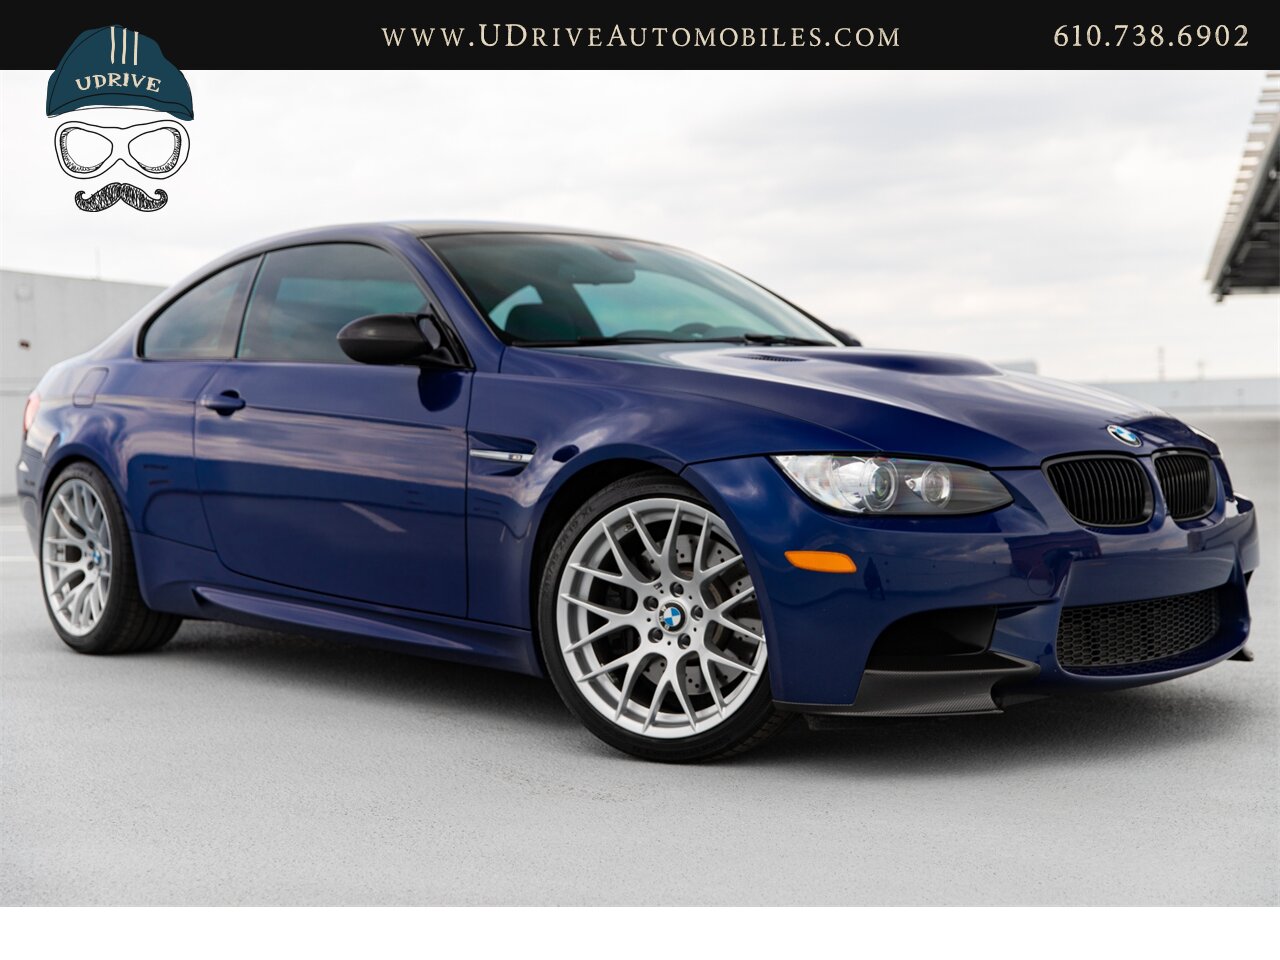 2011 BMW M3 E92 6 Speed Manual Competition Pkg Interlagos Blue  16k Miles Nav PDC EDC Comf Acc - Photo 5 - West Chester, PA 19382